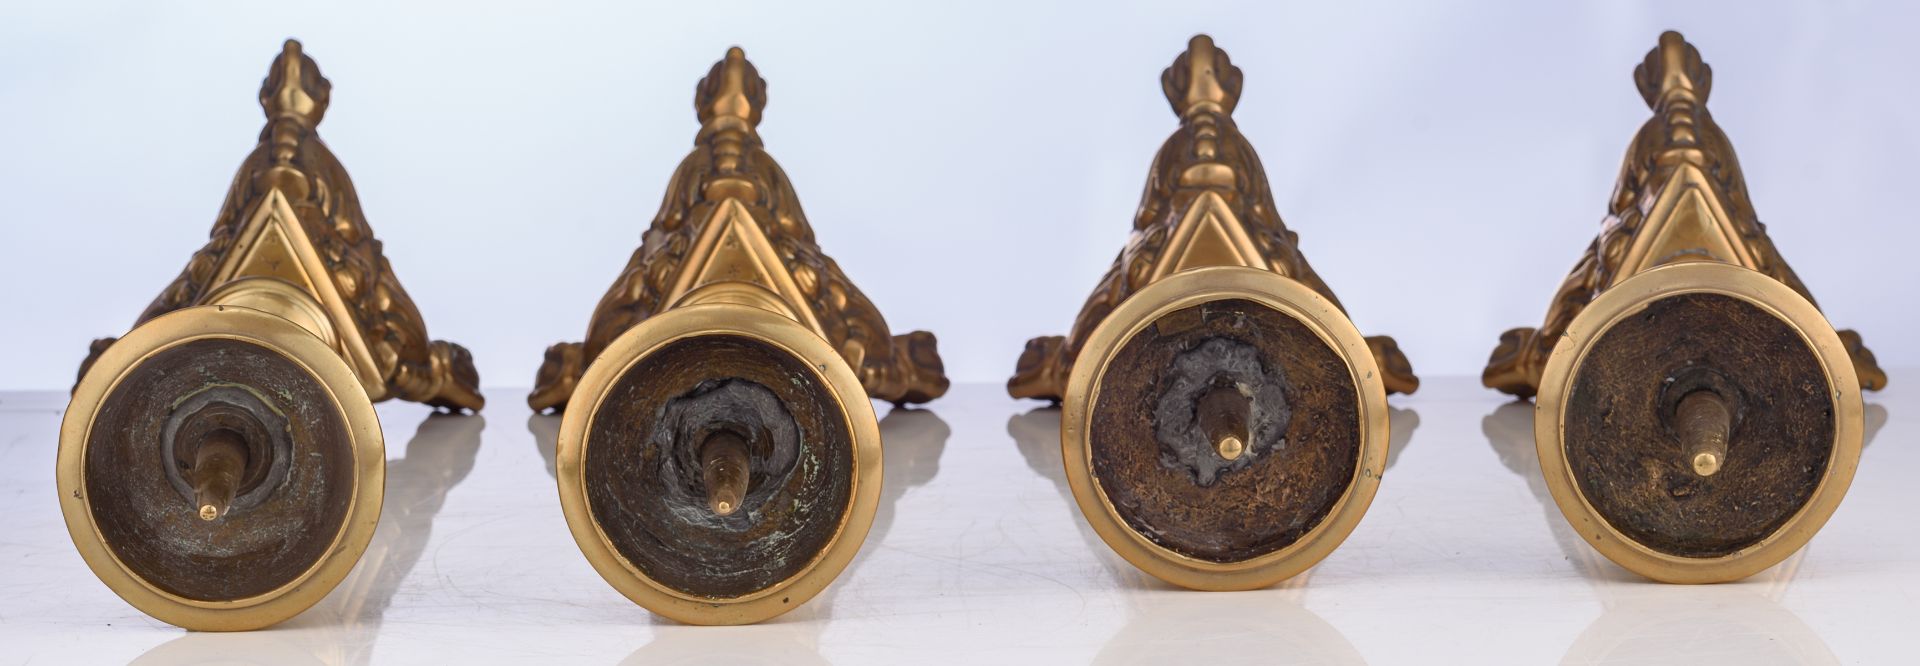 Two pair of Baroque bronze church candlesticks, 17thC, H 38,5 - 43 cm - Image 6 of 7